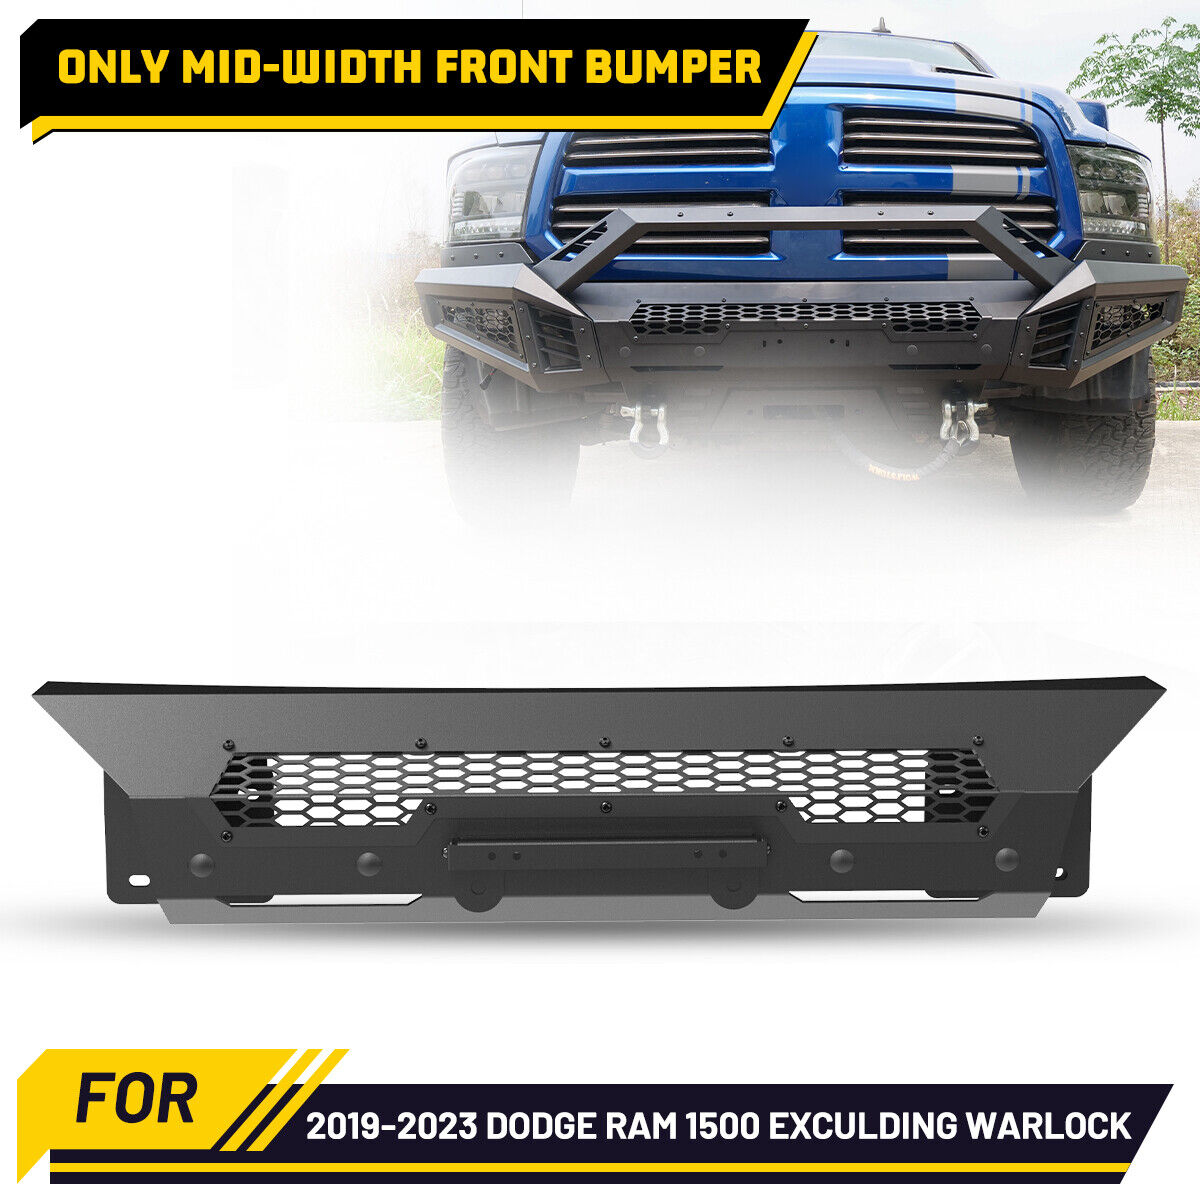 Mid-Width/Side Wings/Bull Bar/Skid Plate For 2013-18 Dodge Ram 1500 Front Bumper